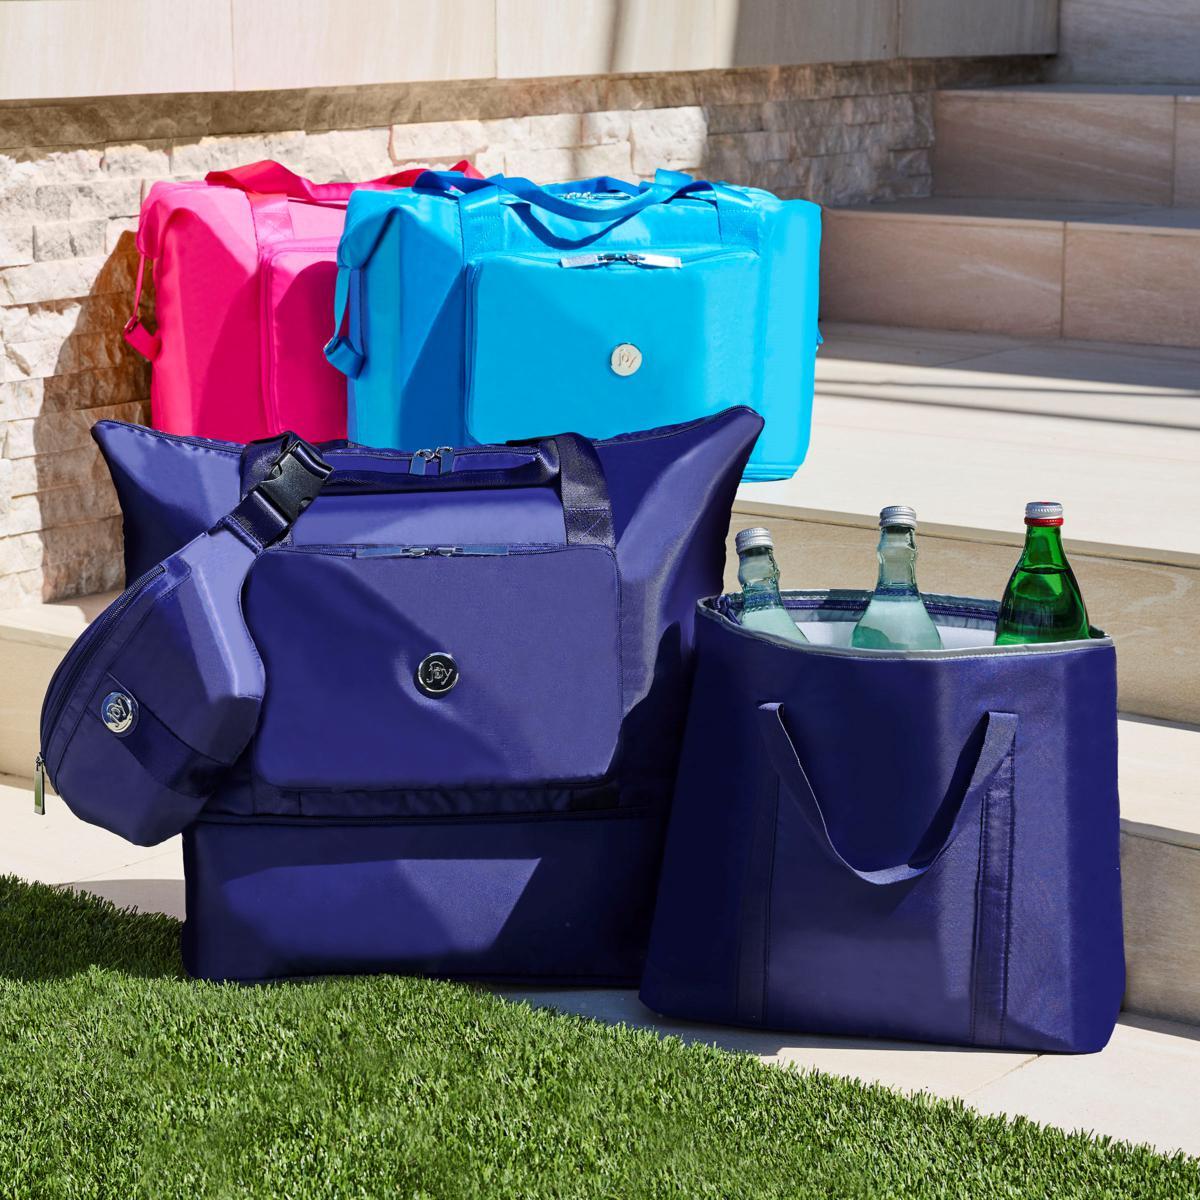 *HOT* Expandable Tote, Belt Bag & Cooler Only $28.45 Shipped ($135 Value) | Over 13K Purchased